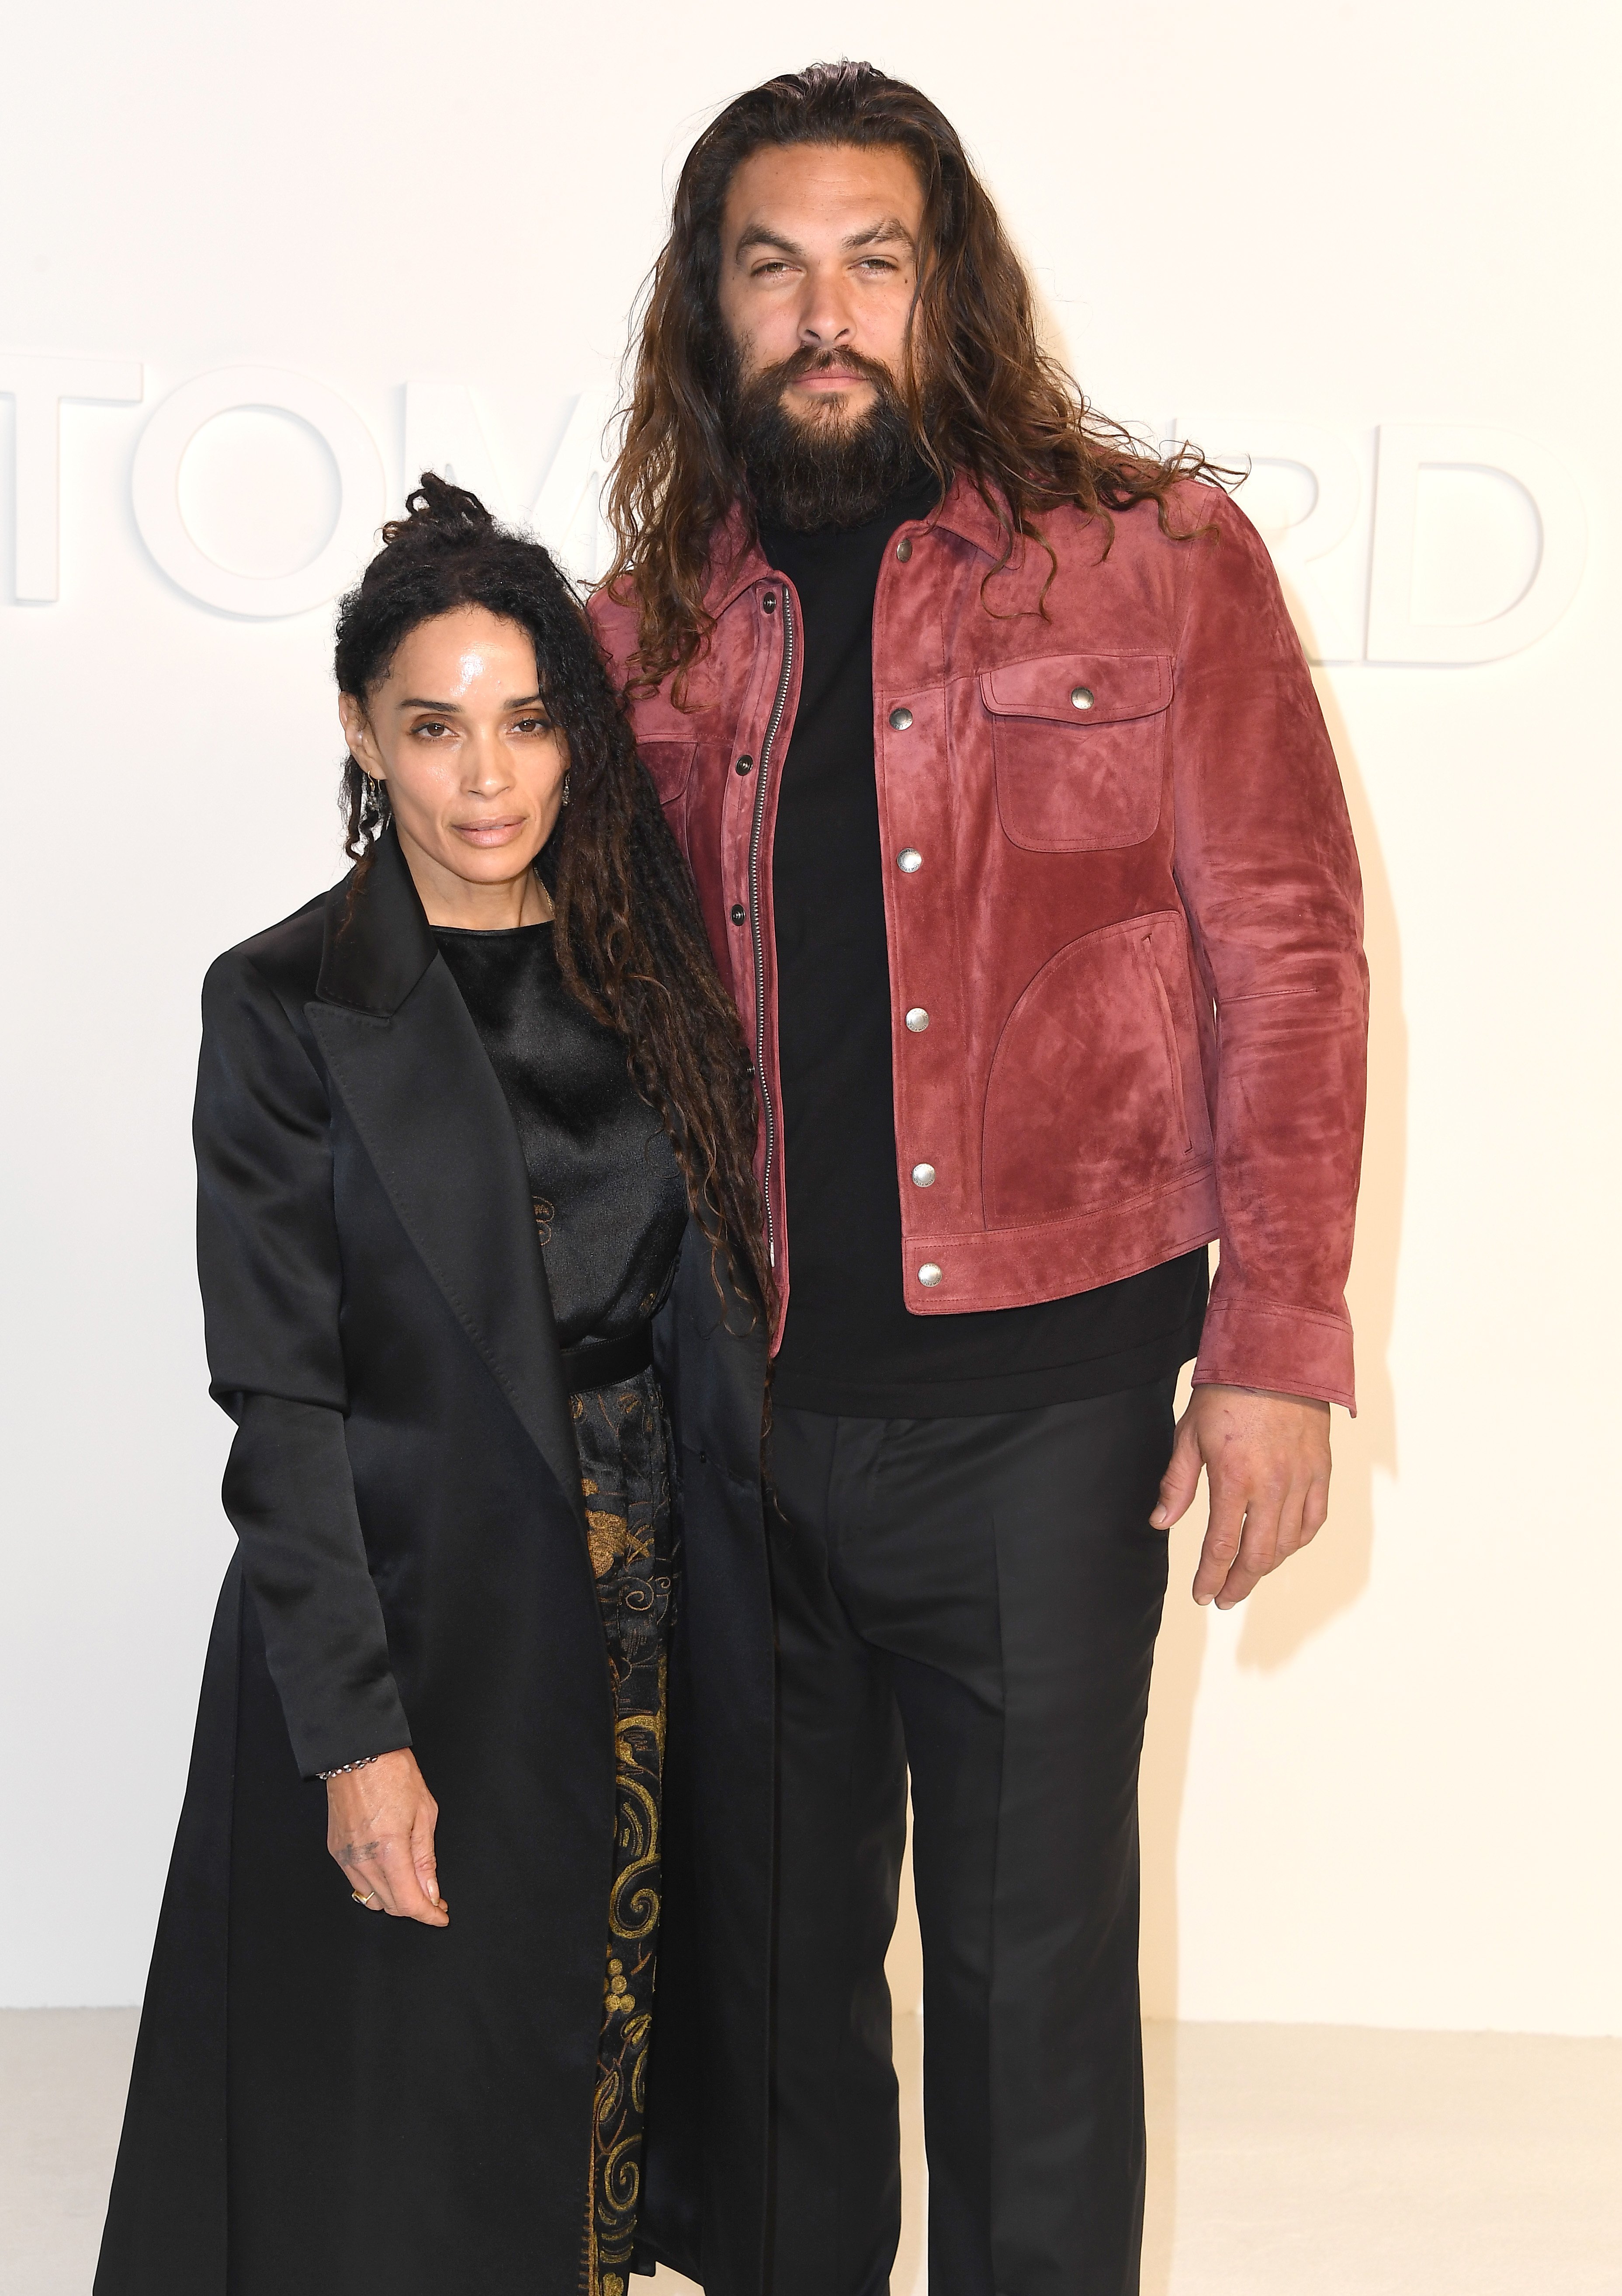 Actor Jason Momoa and his wife Lisa Bonet arrive at the Tom Ford AW20 Show at Milk Studios on February 07, 2020 in Hollywood, California ┃Source: Getty Images